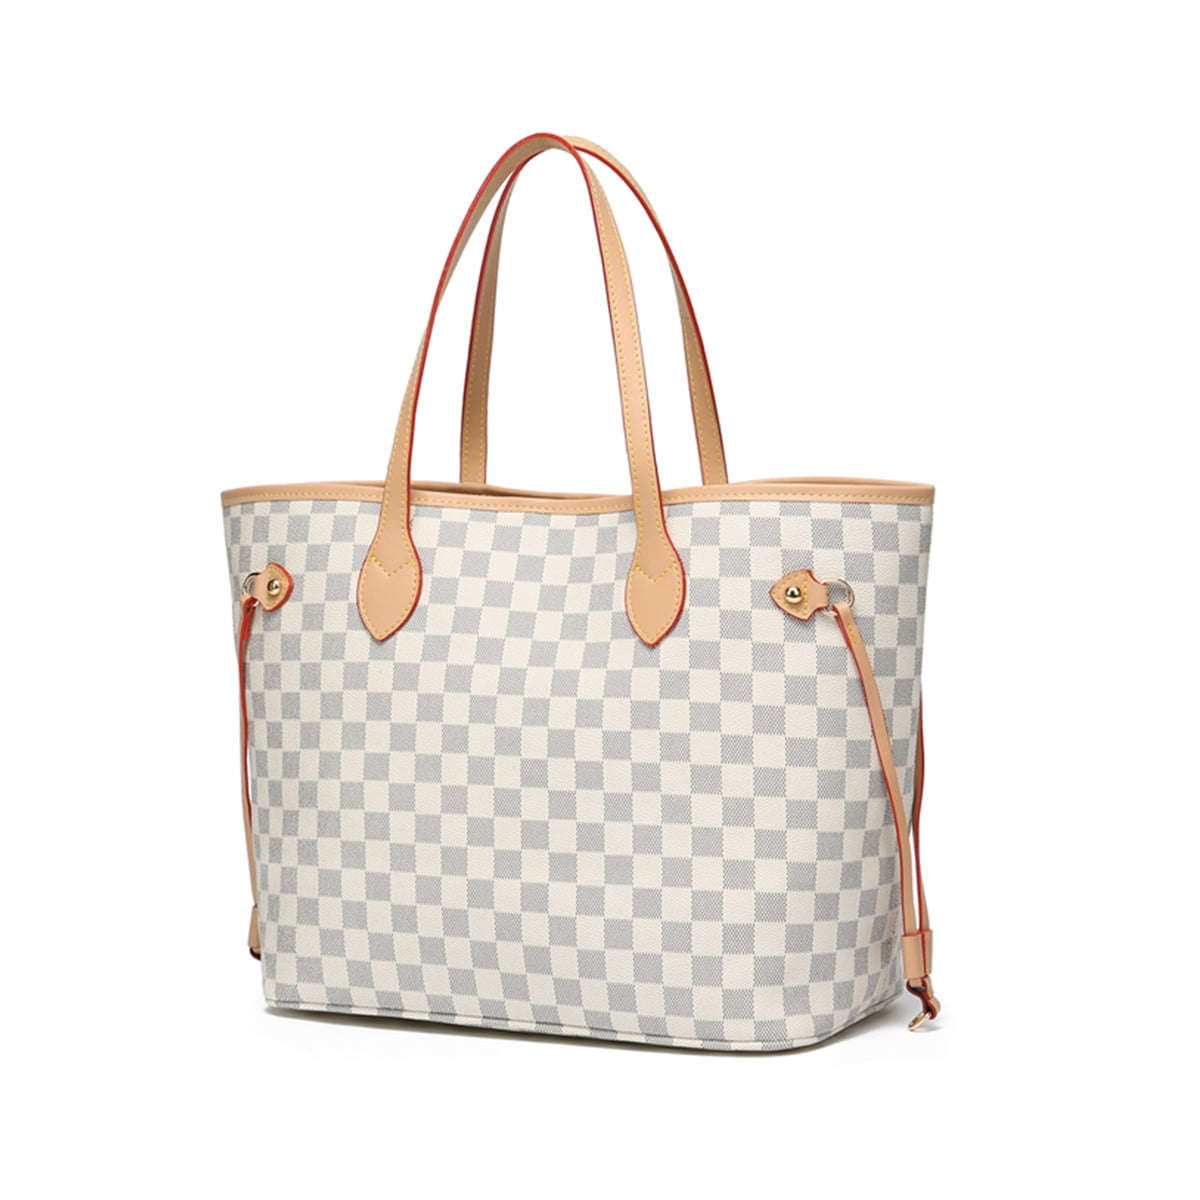 Twenty Four Women'ss Checkered Tote Shoulder Bag With Inner Pouch